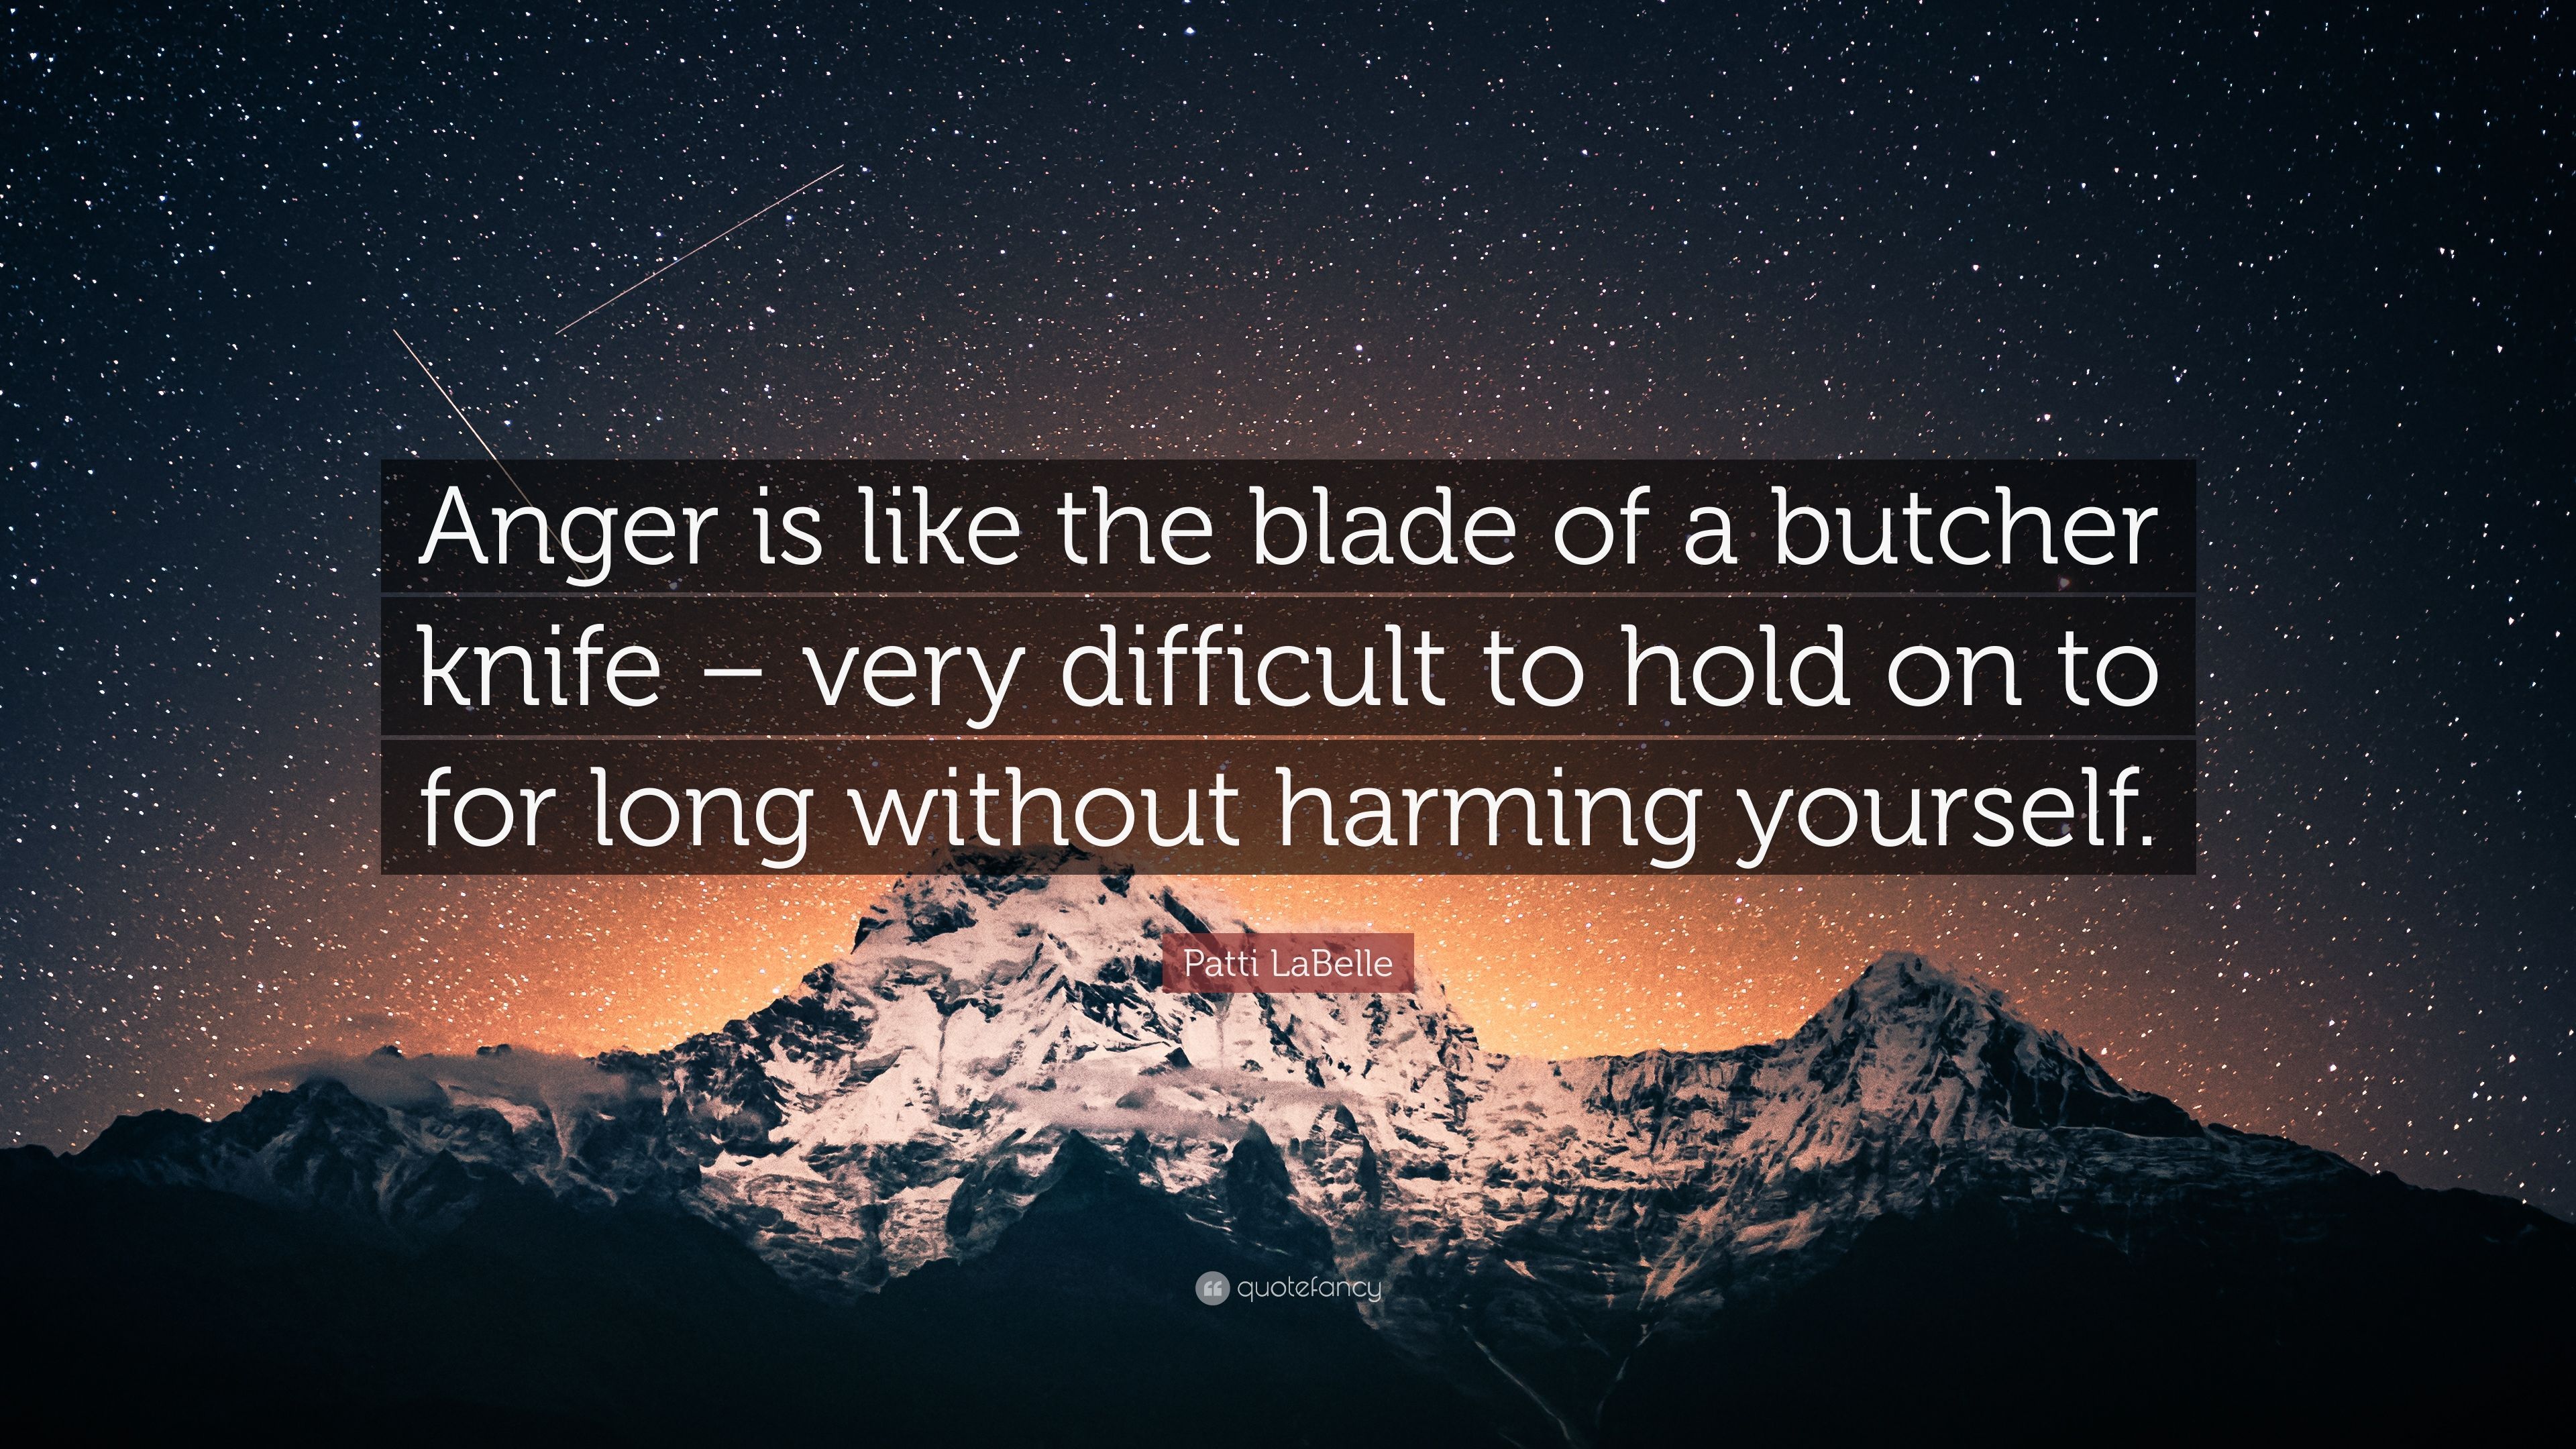 Patti LaBelle Quote: “Anger is like the blade of a butcher knife